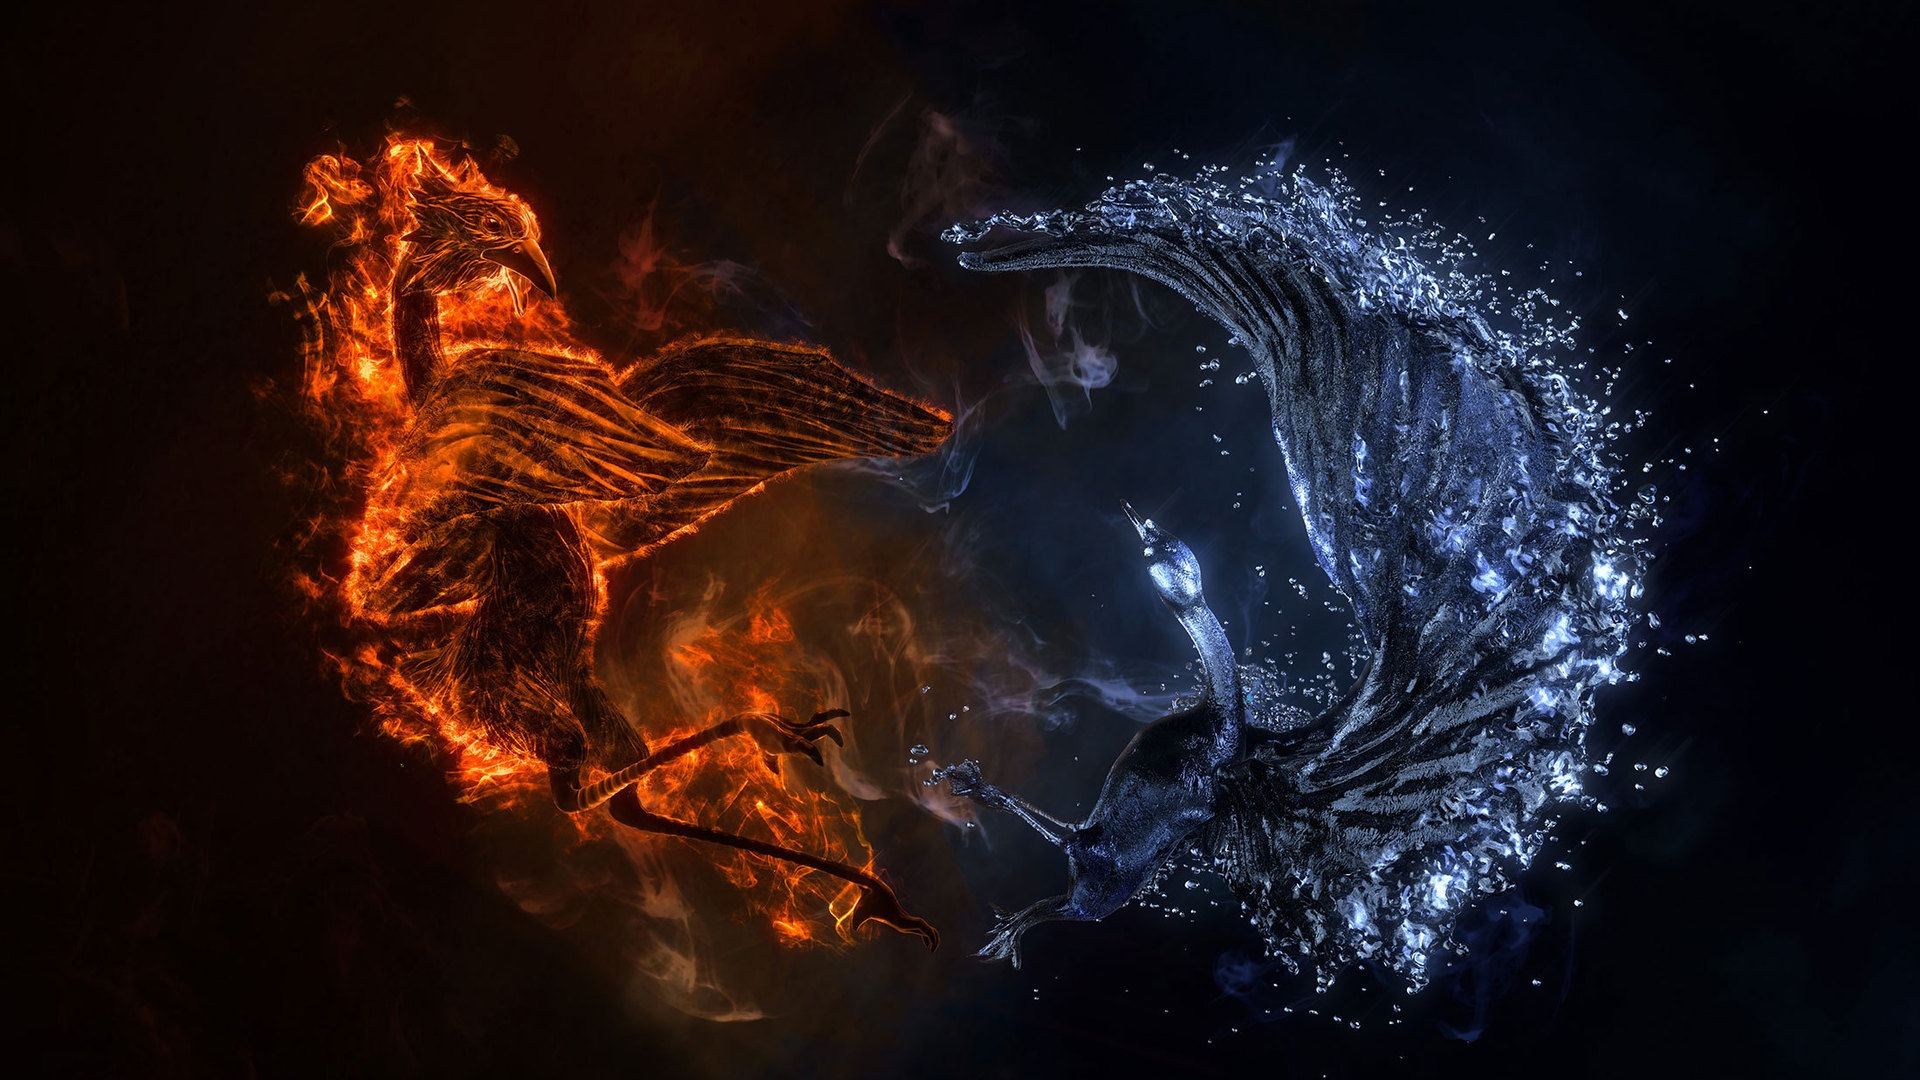 Fire and Water Bird for 1920 x 1080 HDTV 1080p resolution